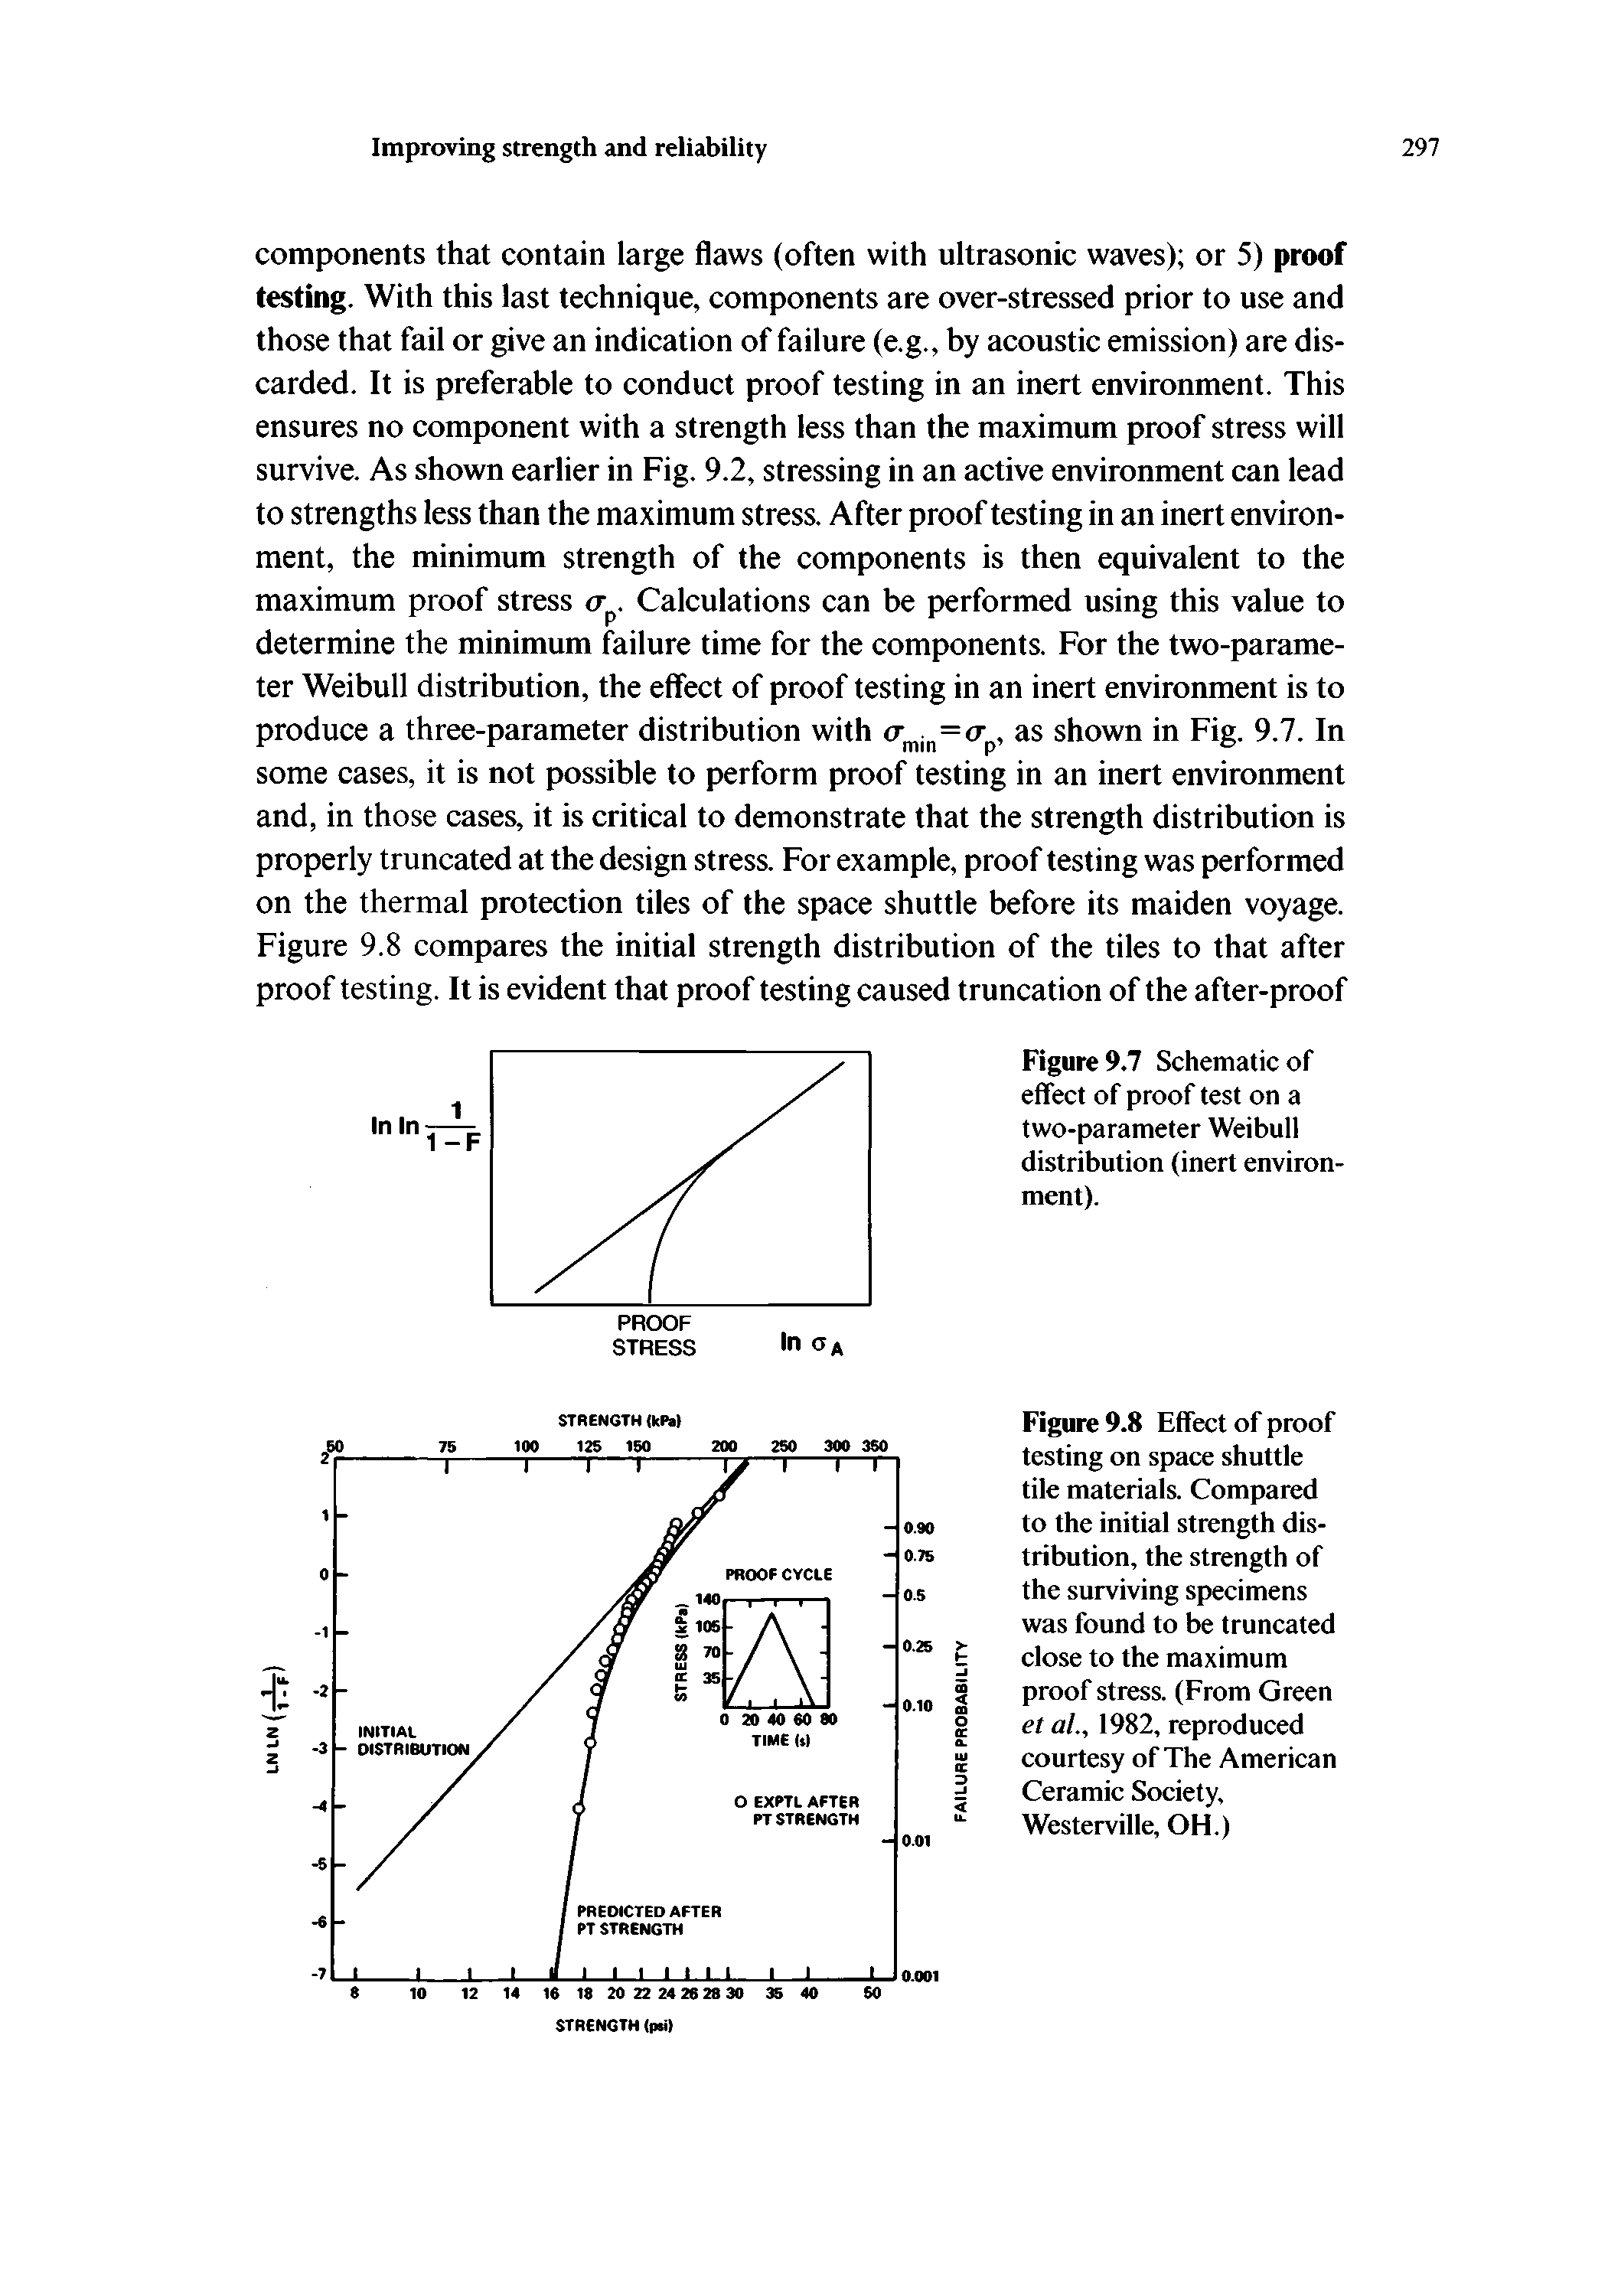 Figure 9.8 Effect of proof testing on space shuttle tile materials. Compared to the initial strength distribution, the strength of the surviving specimens was found to be truncated close to the maximum proof stress. (From Green et al, 1982, reproduced courtesy of The American Ceramic Society, Westerville, OH.)...